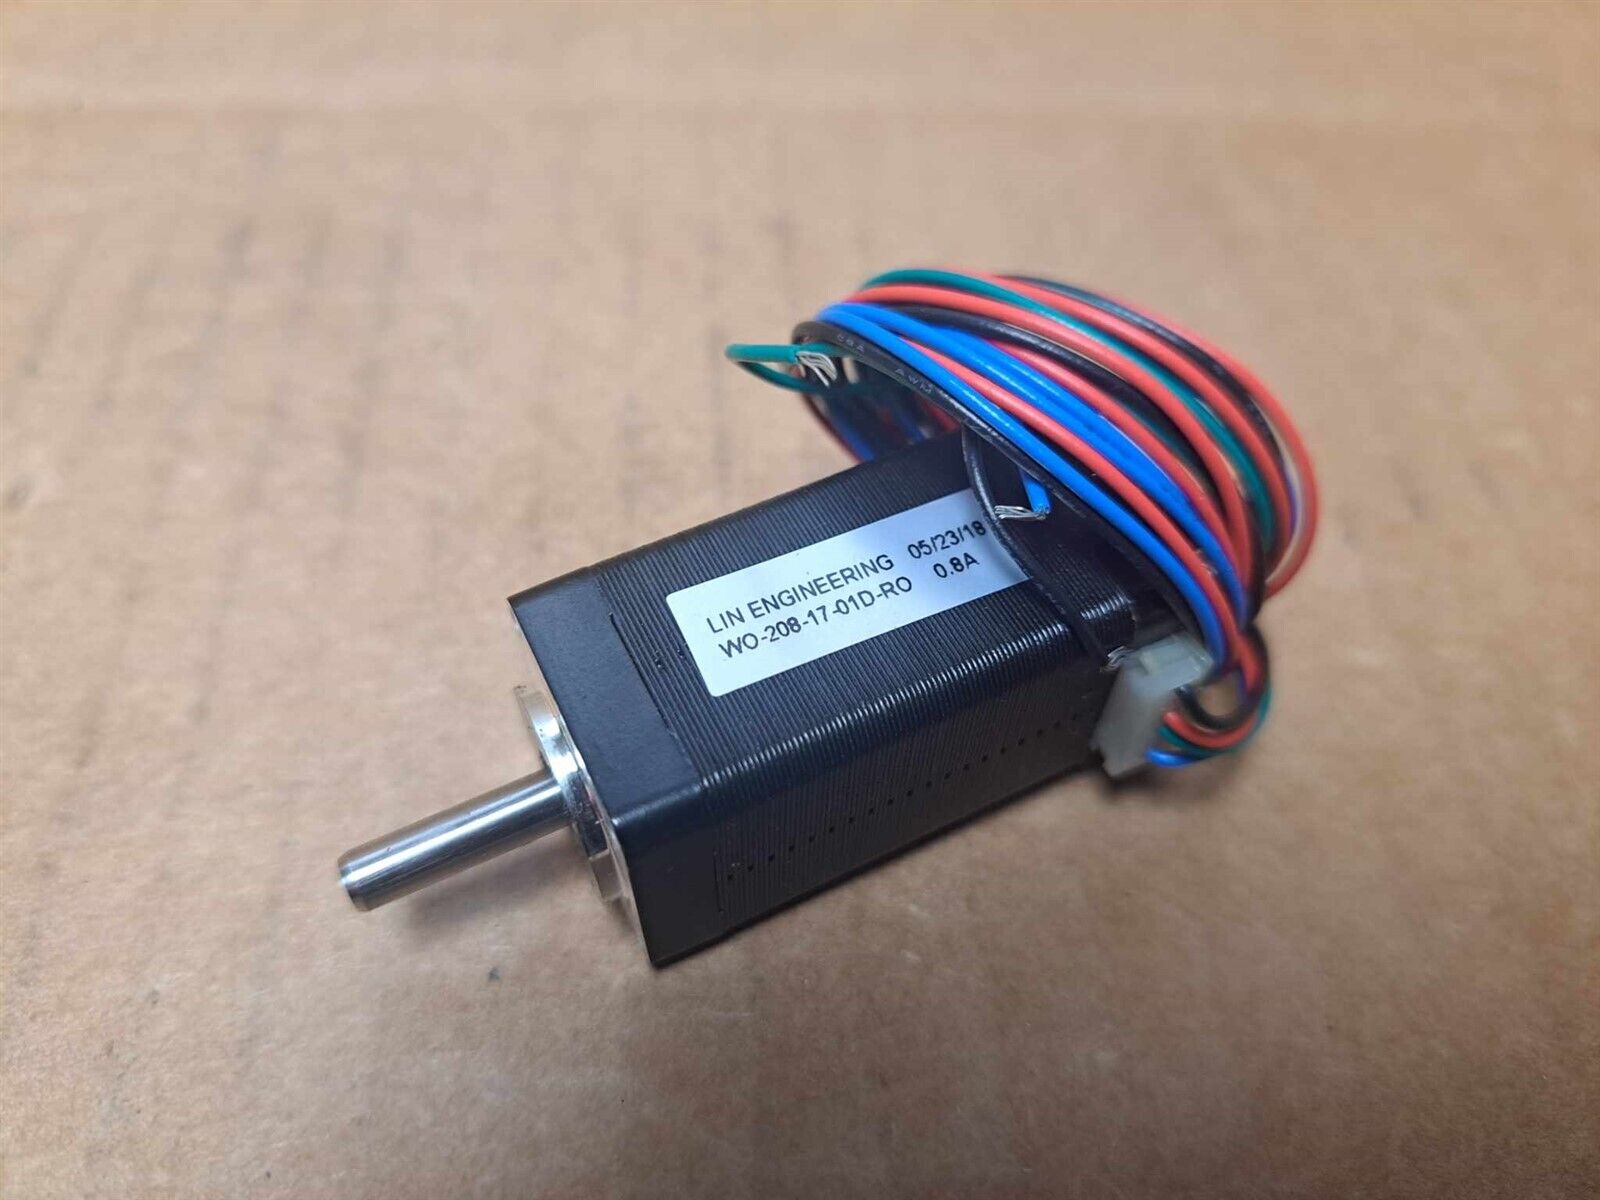 LIN Engineering Stepper Motor Part No. WO-208-17-01D-RO